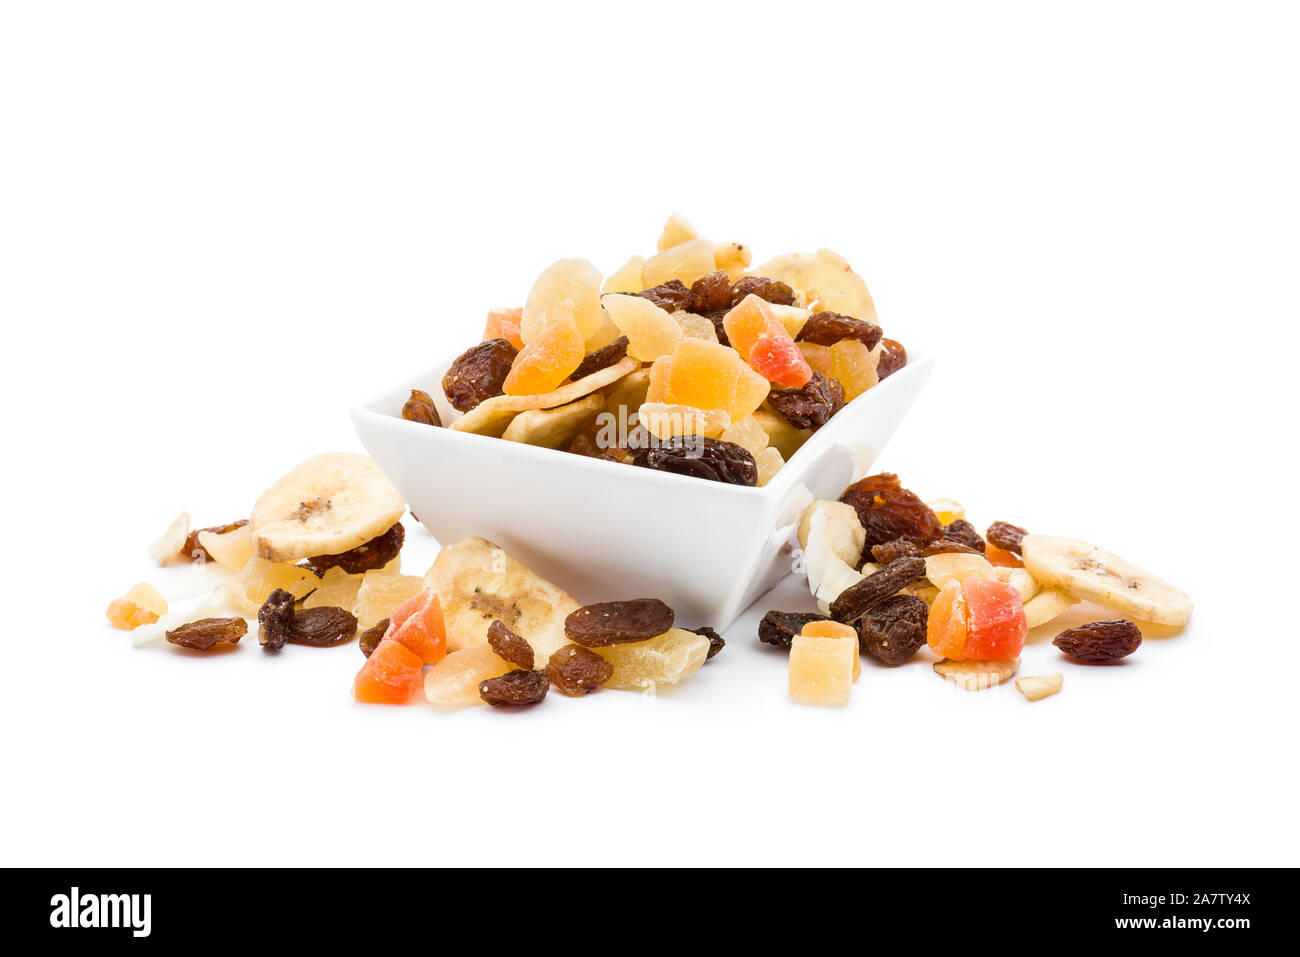 Dried fruits in white bowl on white background Stock Photo